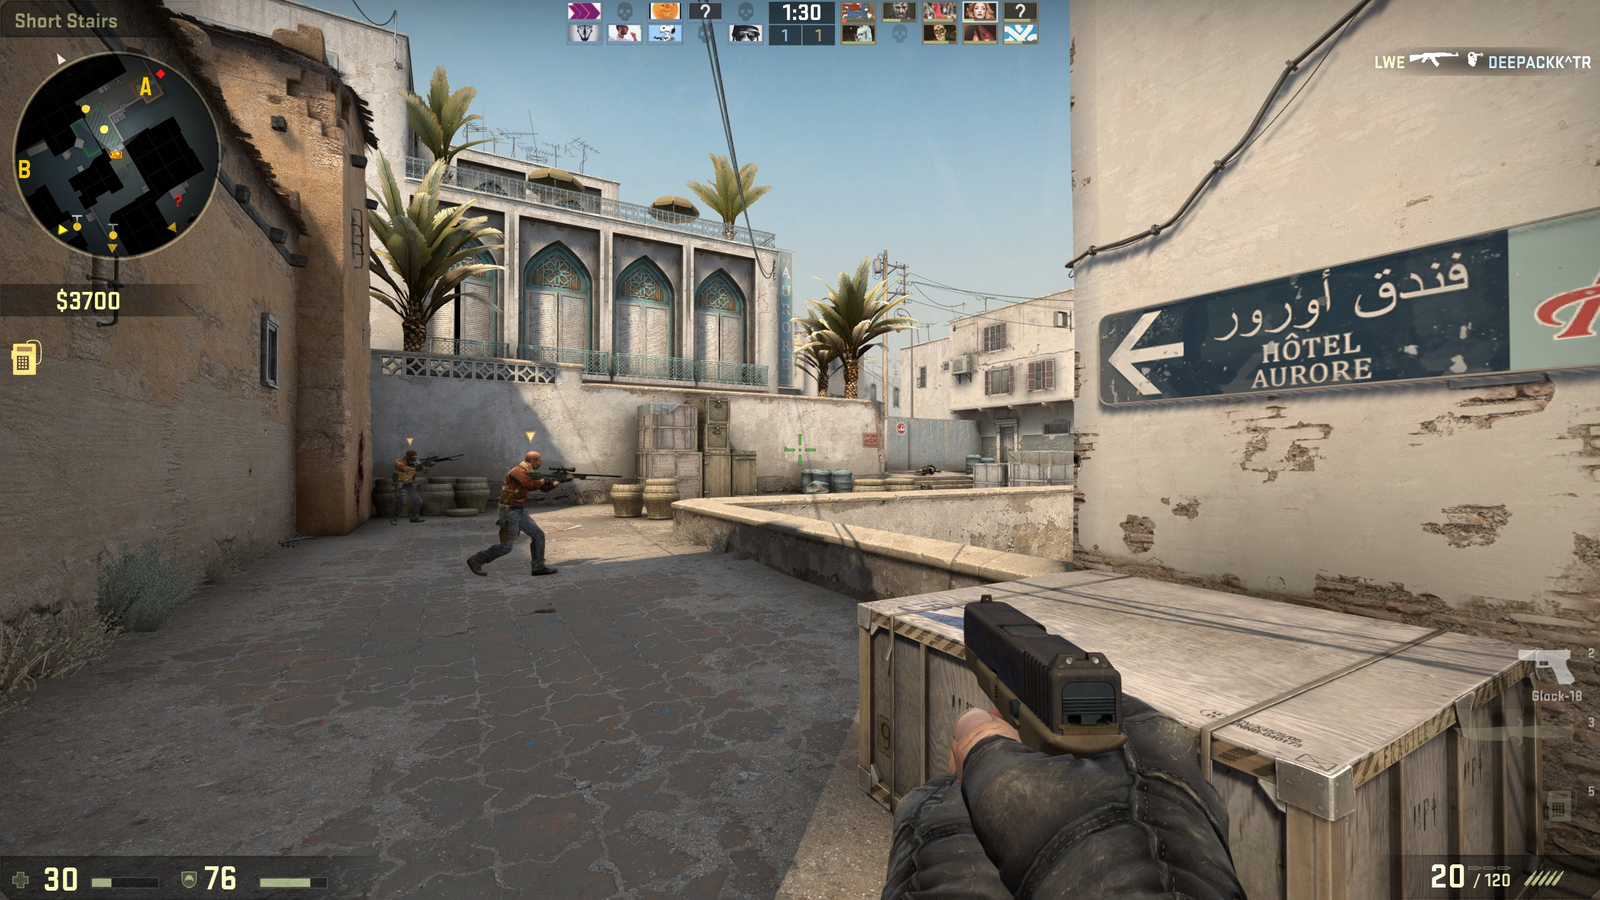 Counter Strike, PDF, Cheating In Video Games